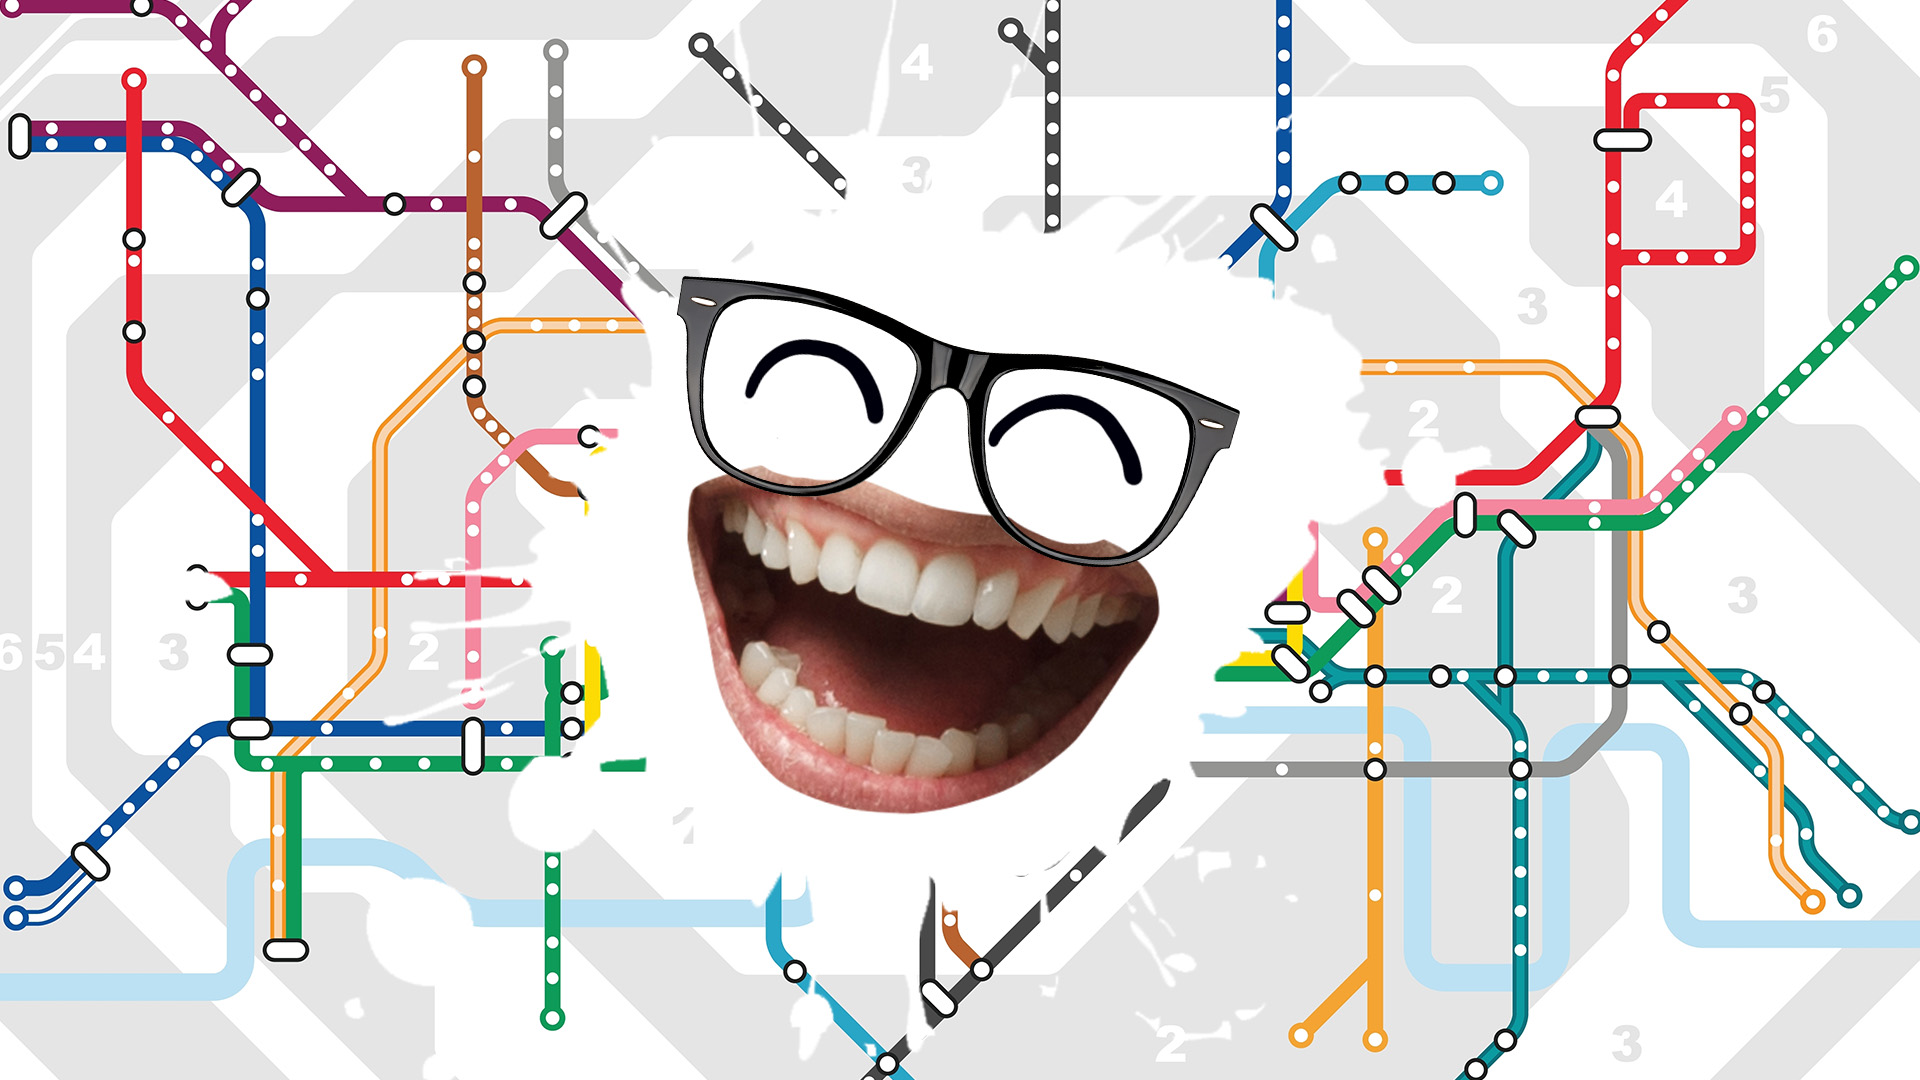 The London Underground map laughing